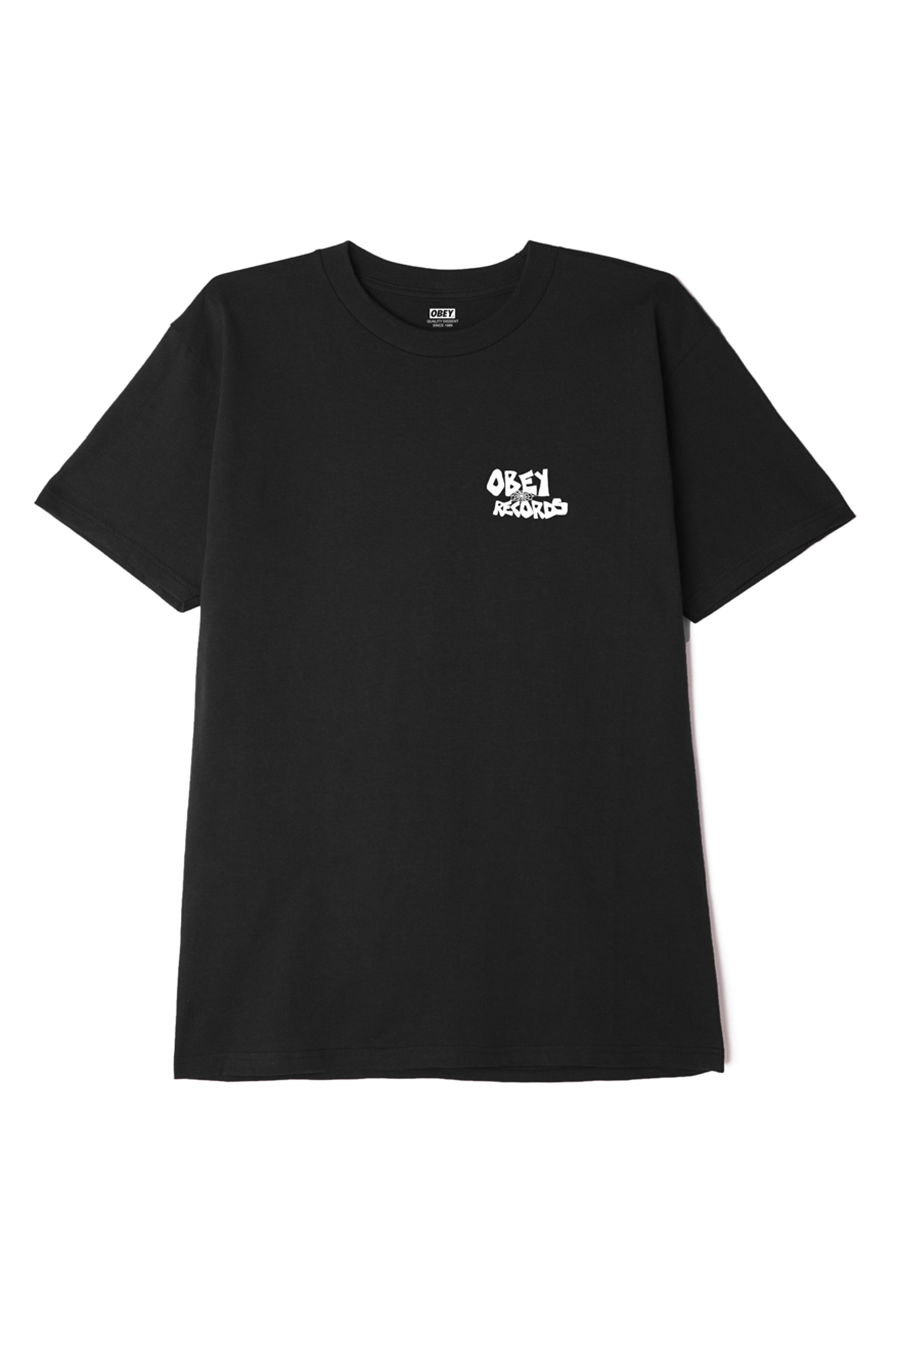 Obey Records Web Tee | Black - Main Image Number 1 of 2